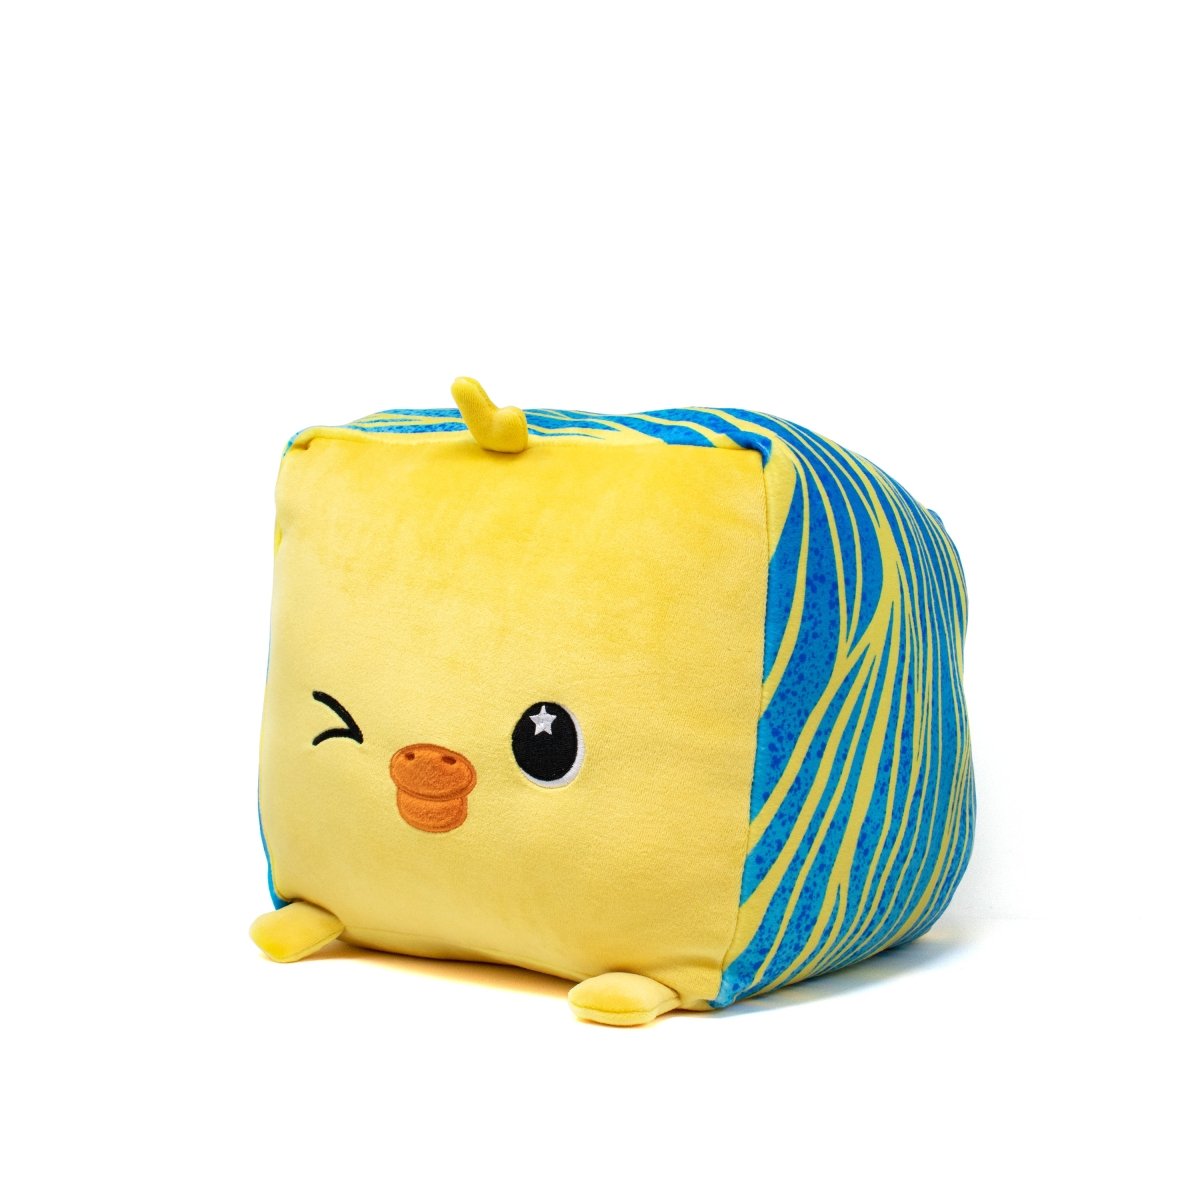 Rei the Duck plush toy with bright yellow feathers, playful wink, and orange beak from Moosh-Moosh SQUARED² Collection.